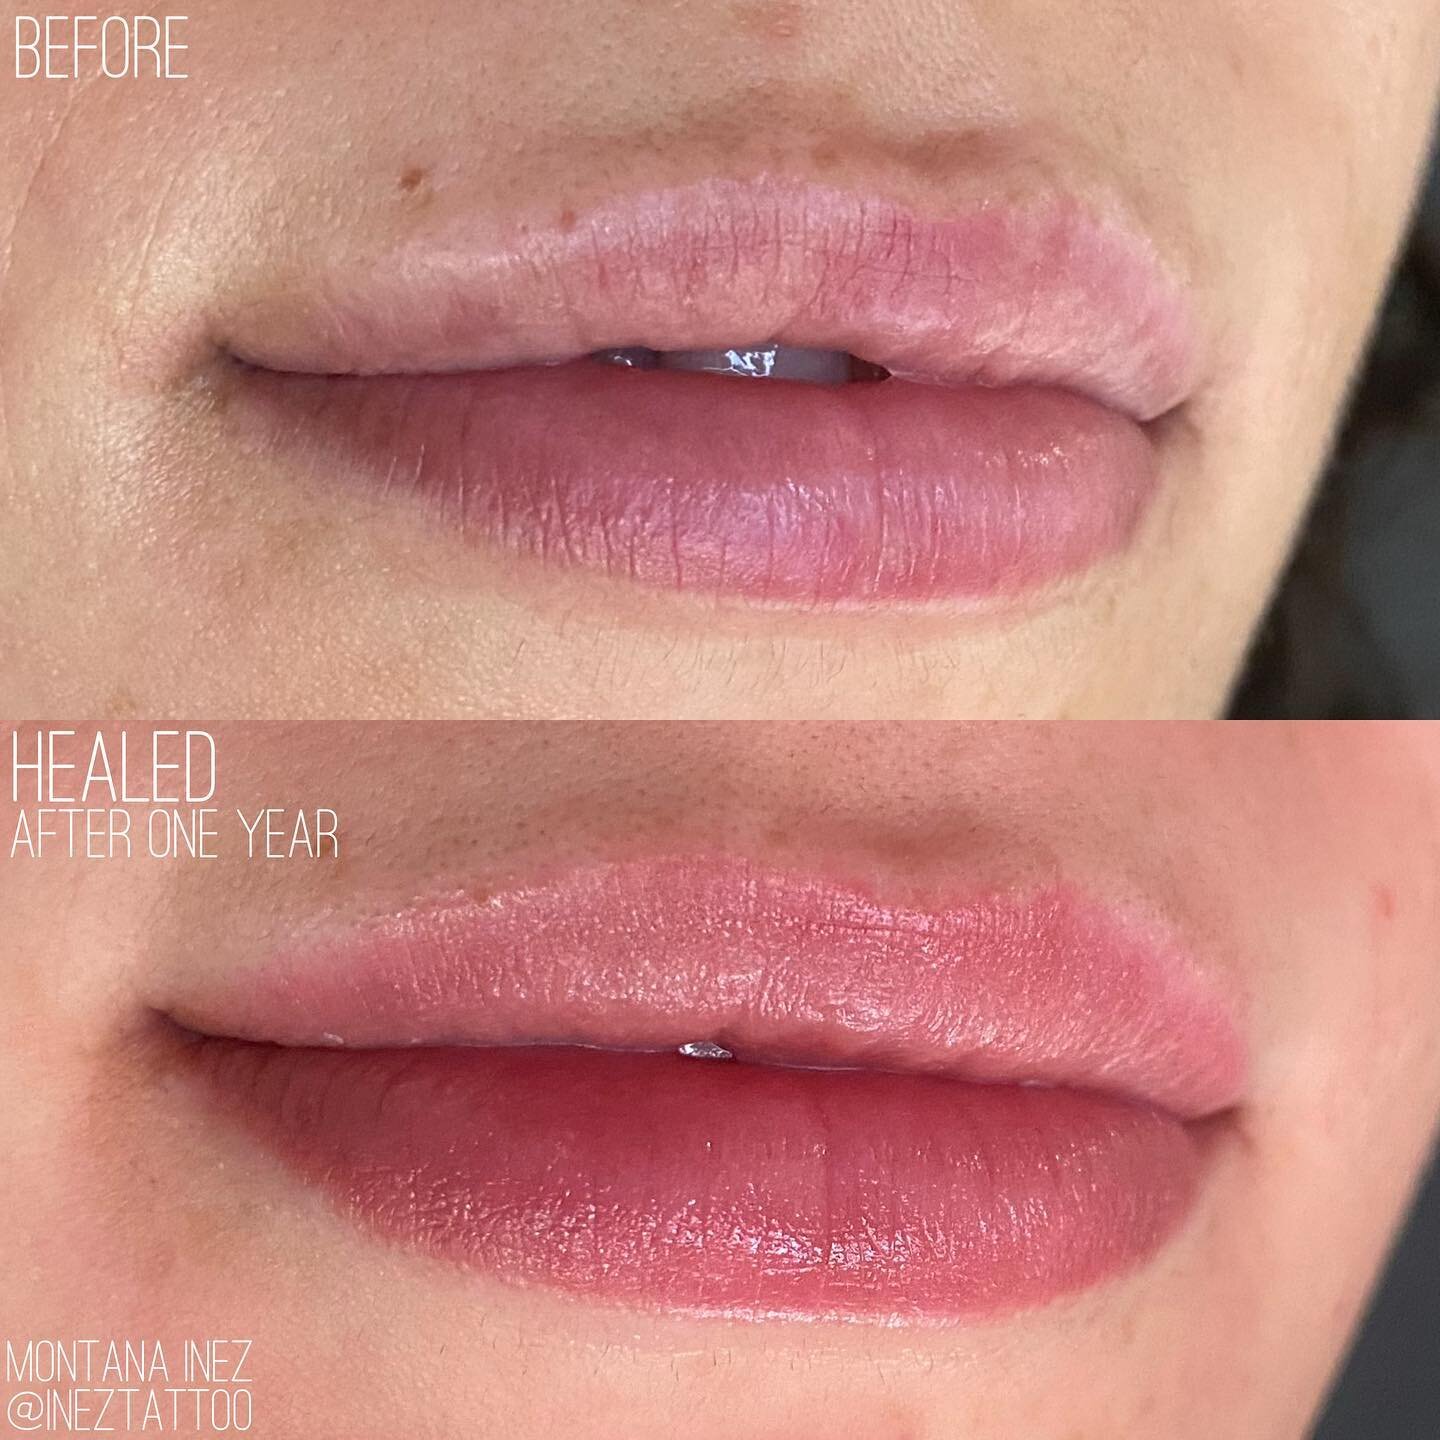 HEALED lip blush, after 1 year since our last session!

My client was feeling ready for a little more of a bolder colour after seeing just how natural the results can be!
This is a common phenomenon and taking baby steps in building up to your desire